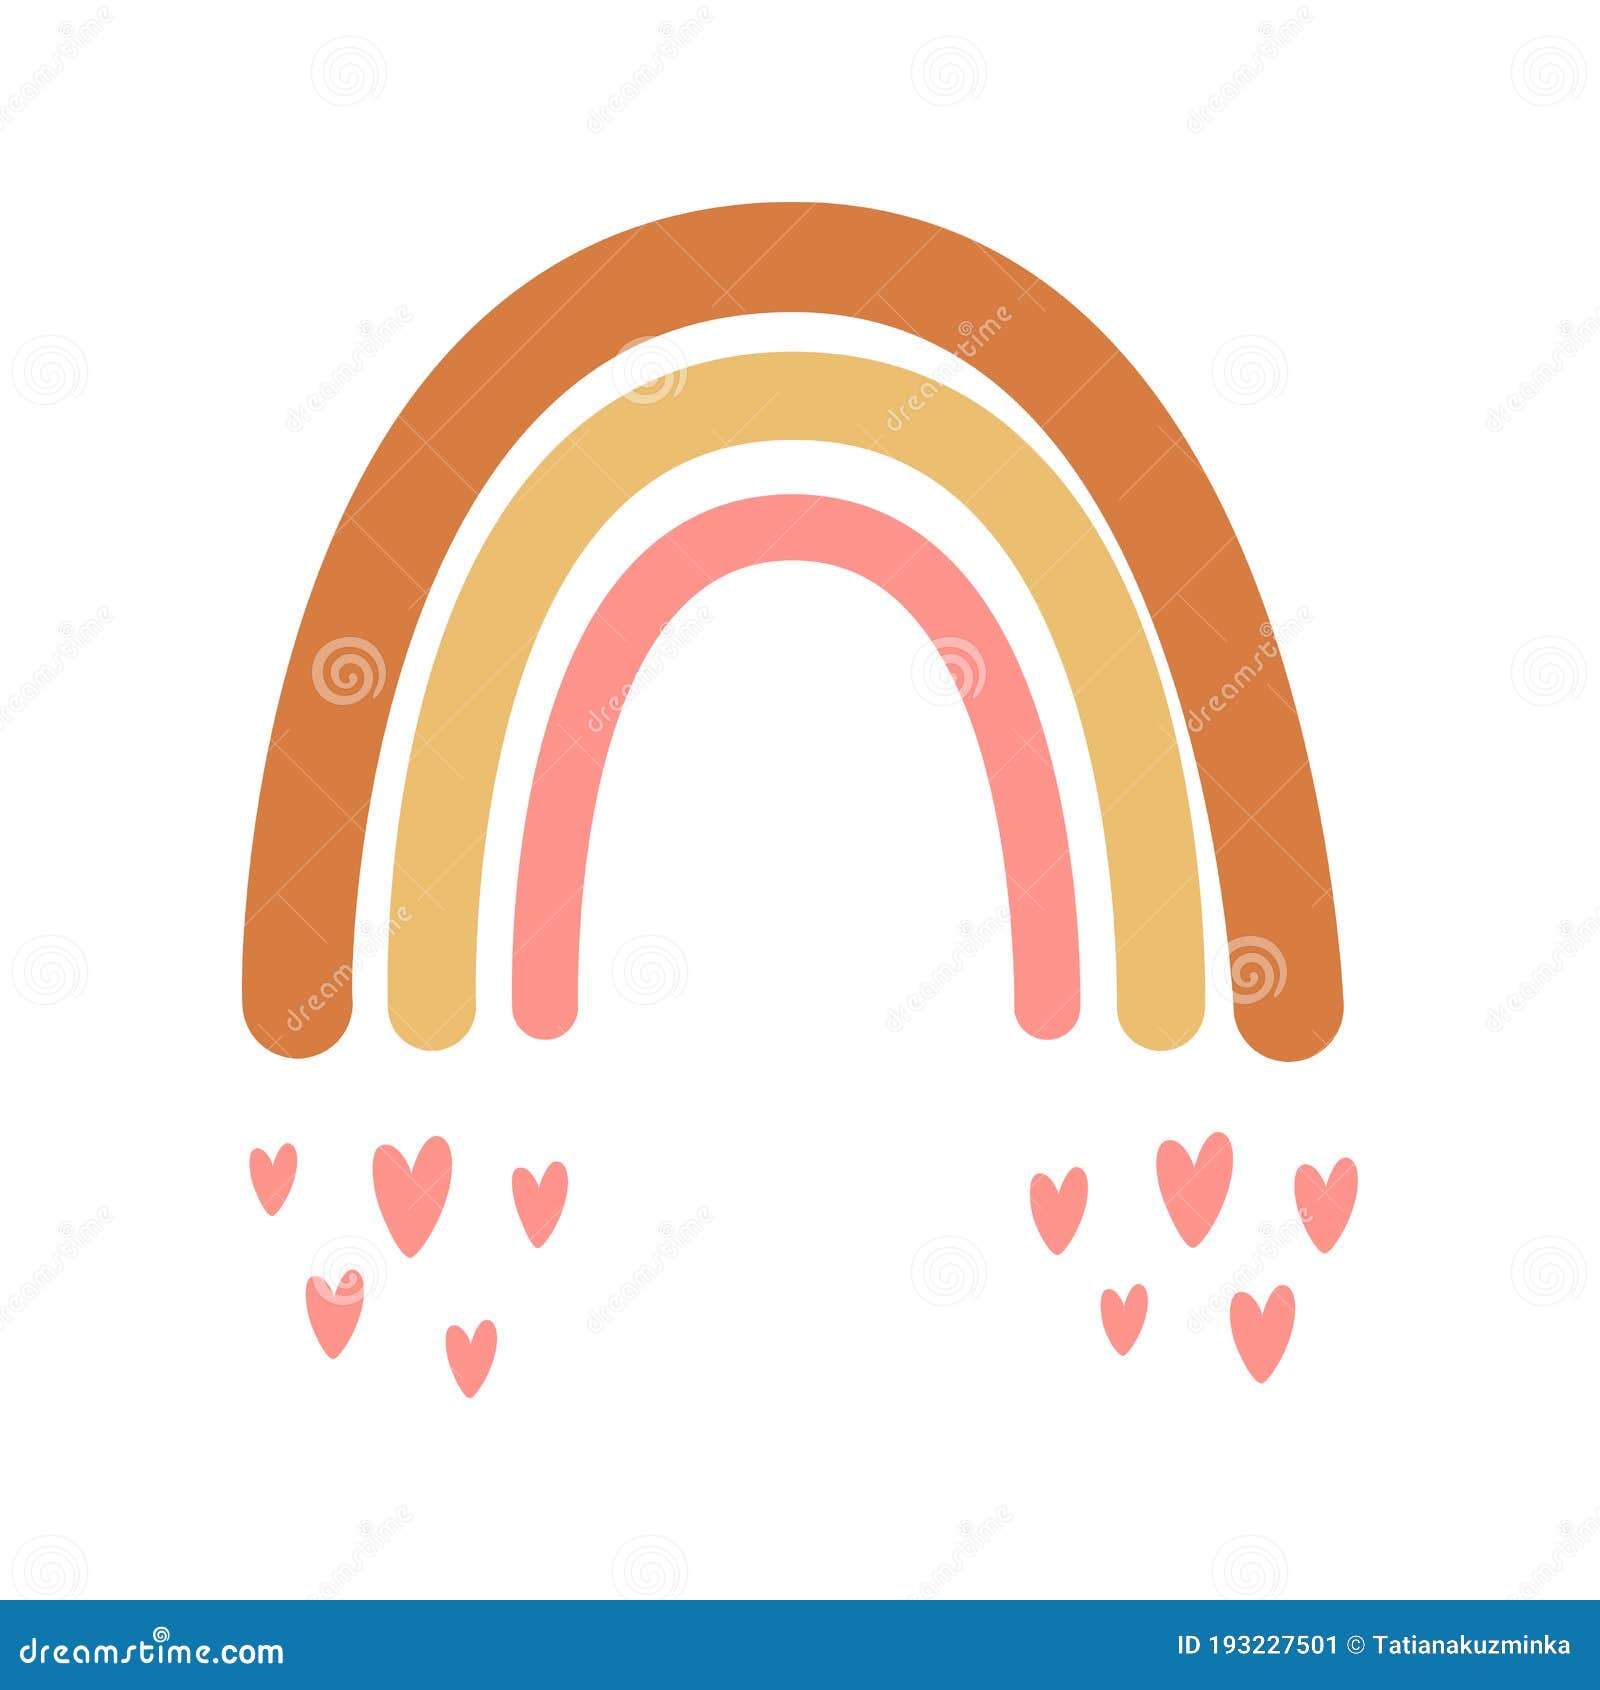 Baby Rainbow Illustration With Heart. Cute Baby Shower ...